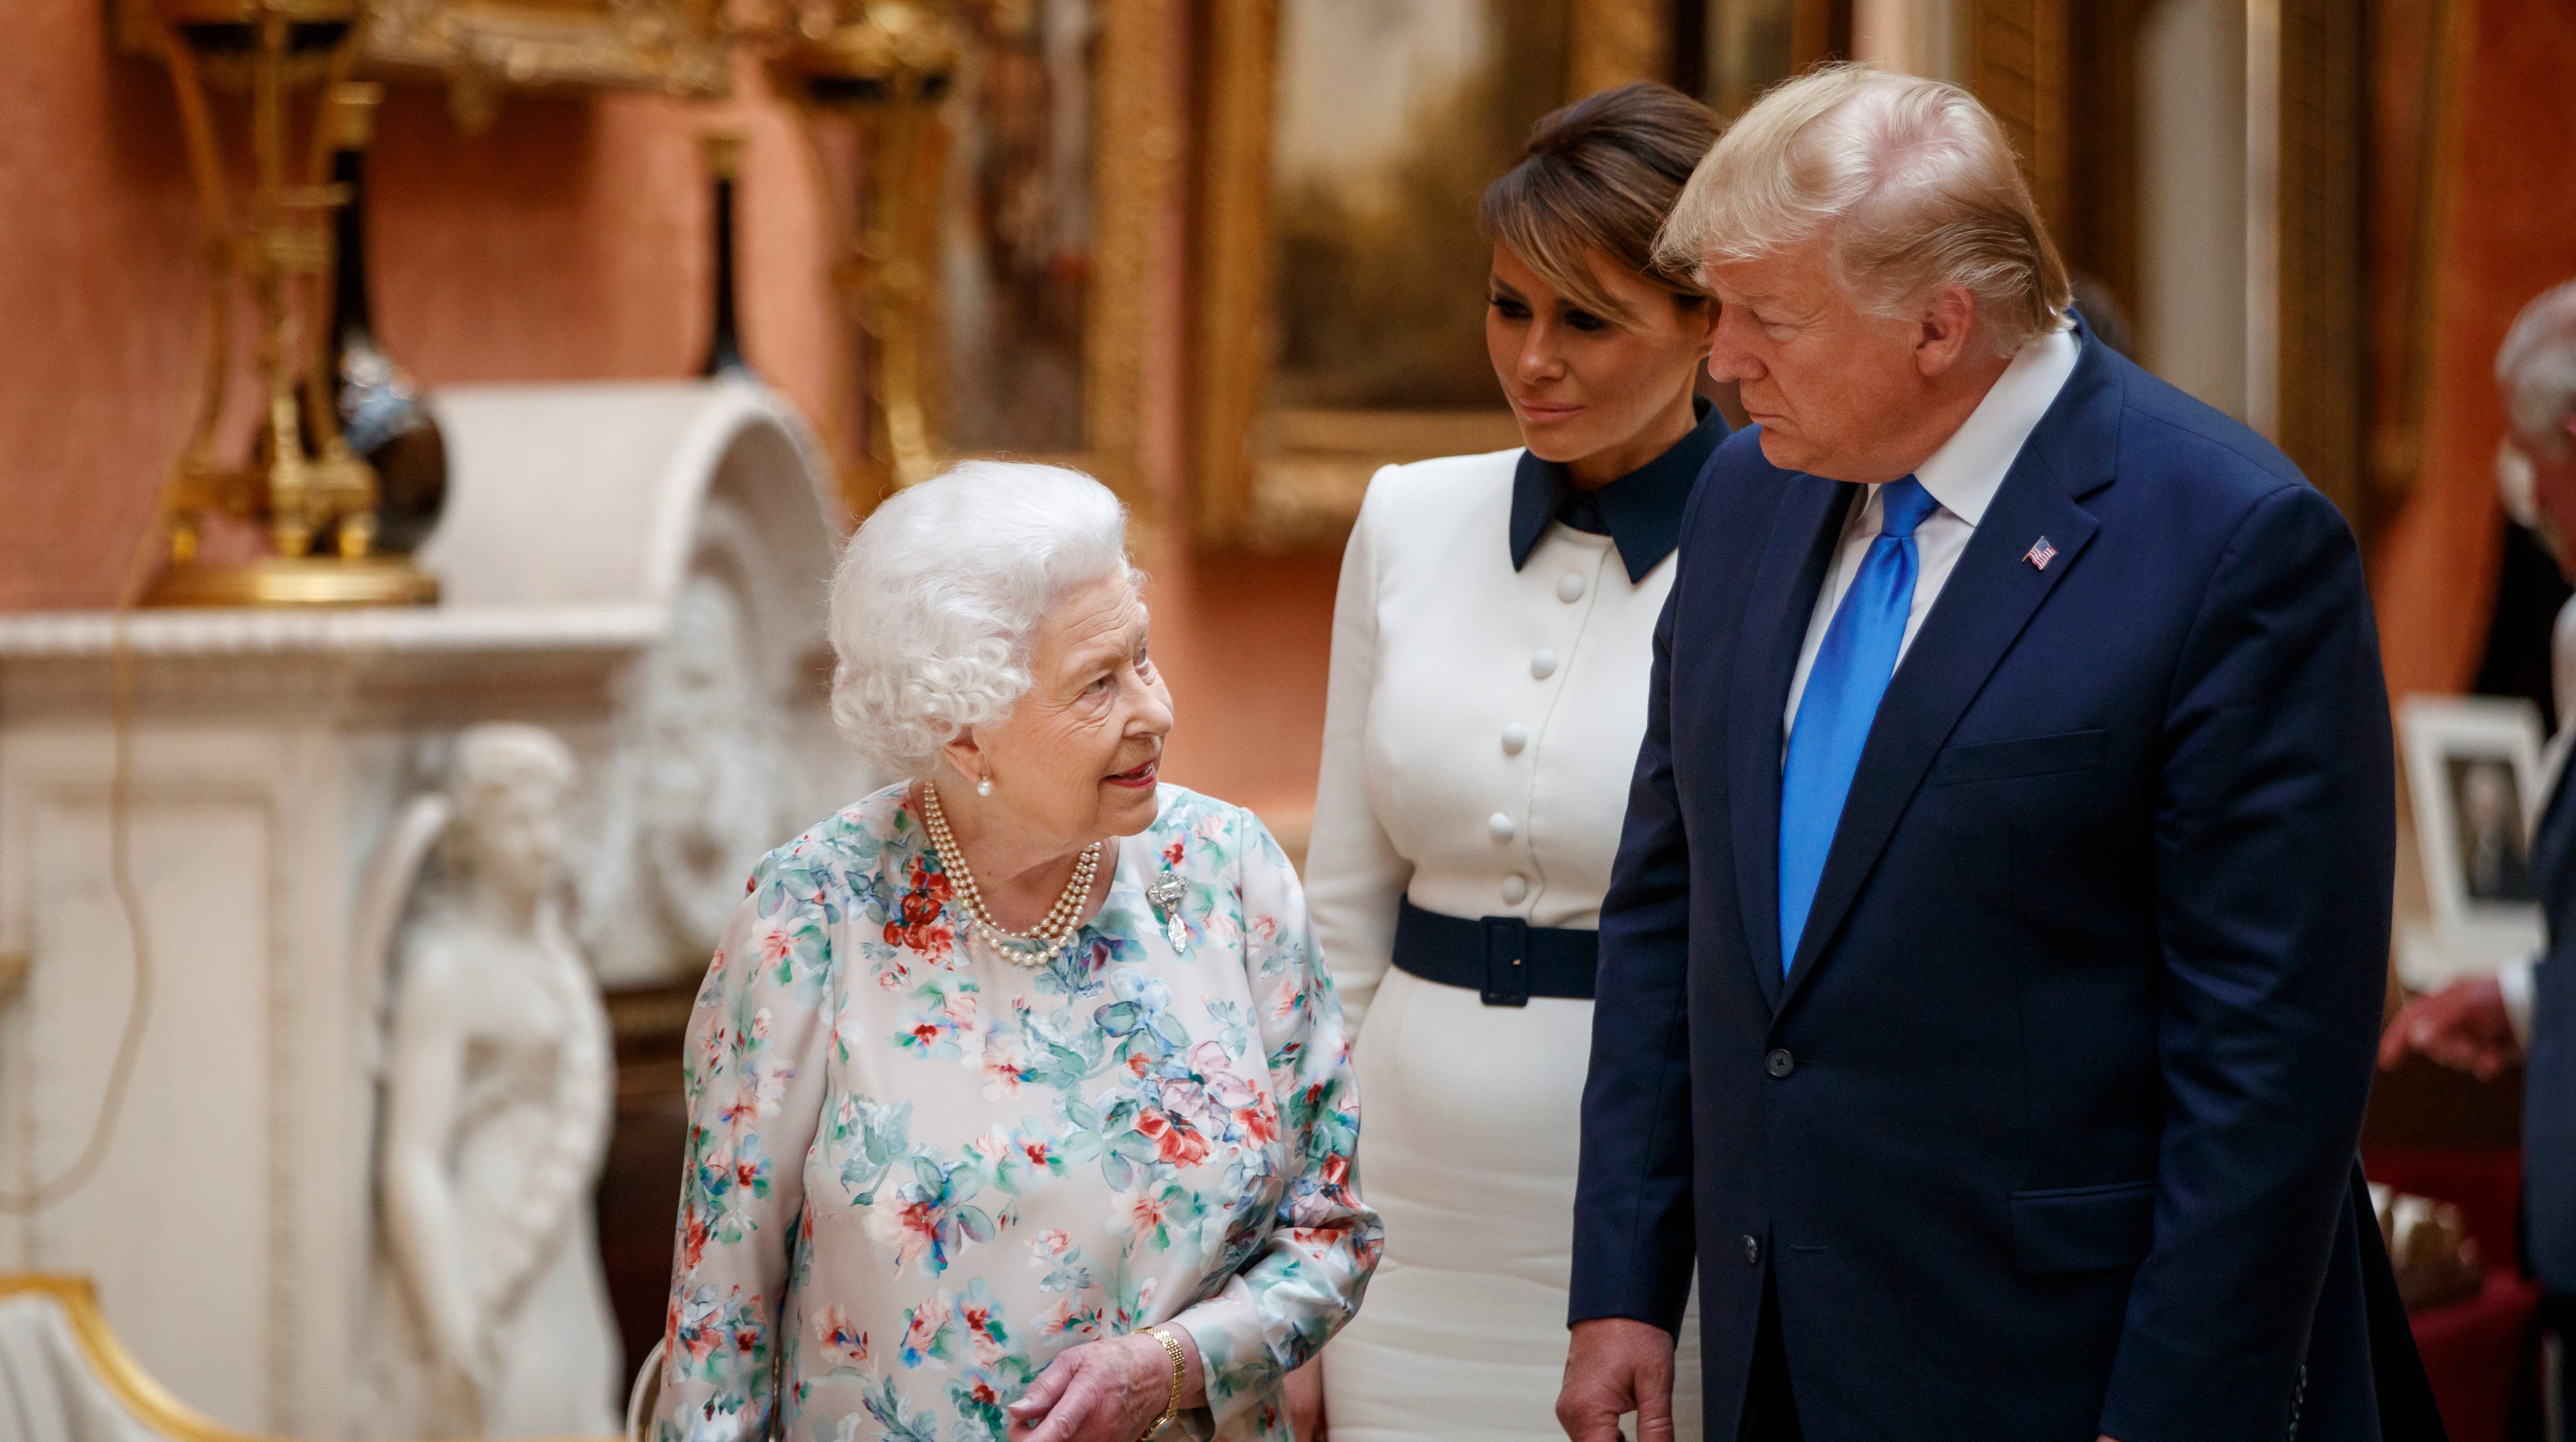 Queen Elizabeth II, President Trump and and First Lady Melania Trump view displays of U.S. items in the Royal collection at Buckingham Palace on June 3, 2019 in London.